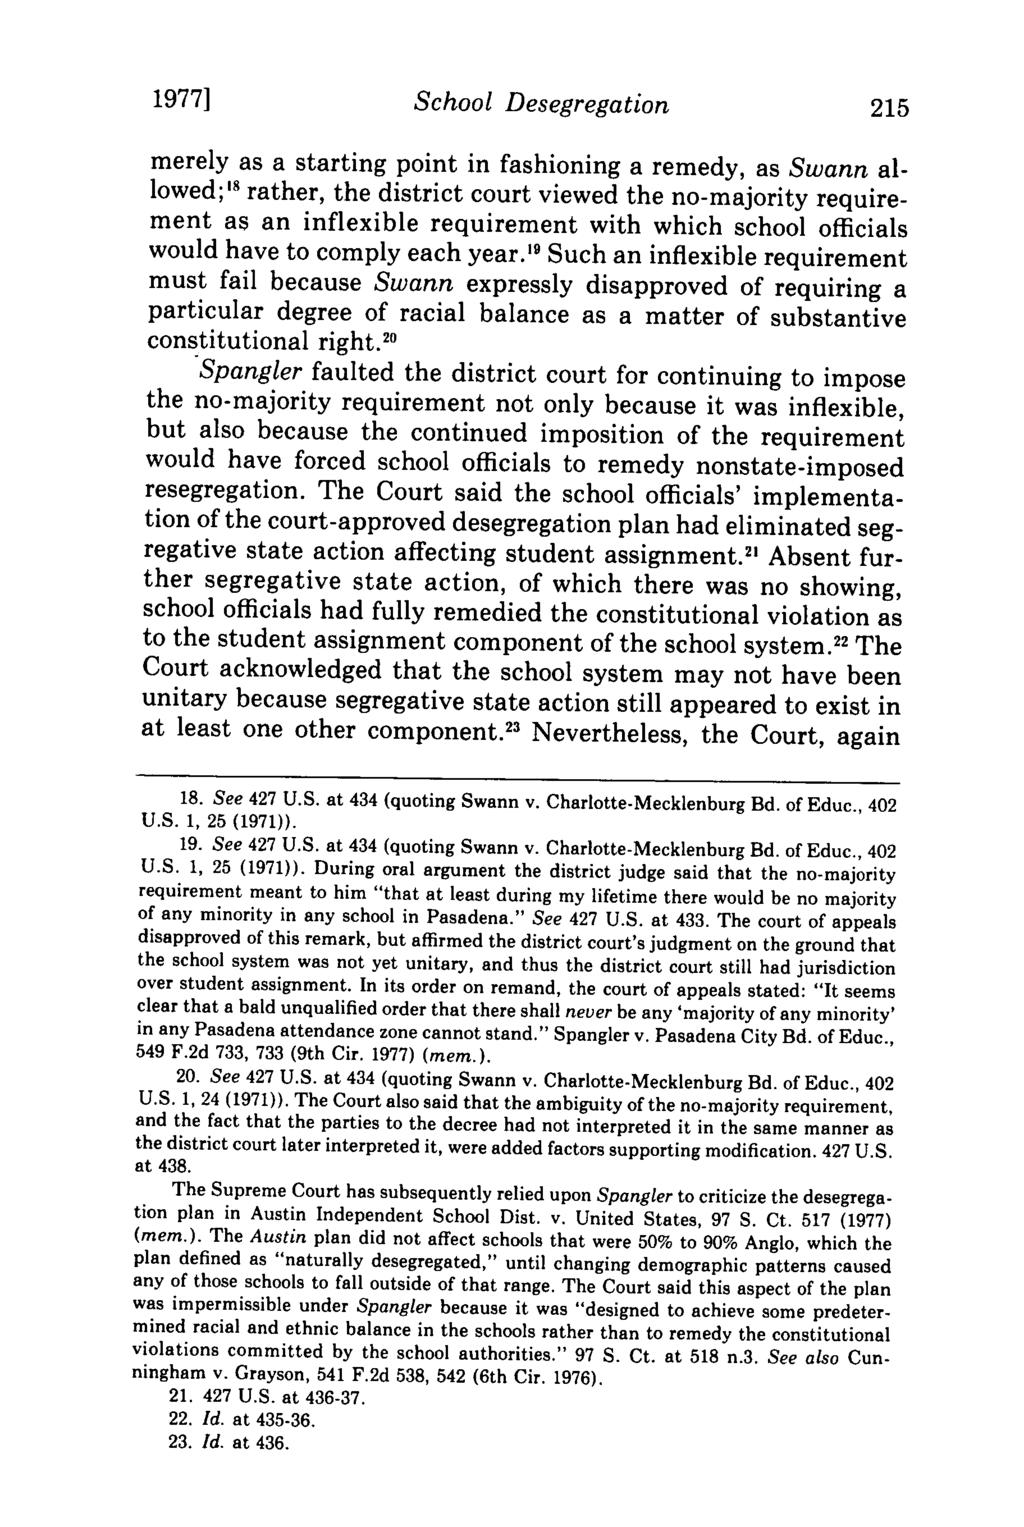 19771 School Desegregation merely as a starting point in fashioning a remedy, as Swann allowed;'" rather, the district court viewed the no-majority requirement as an inflexible requirement with which